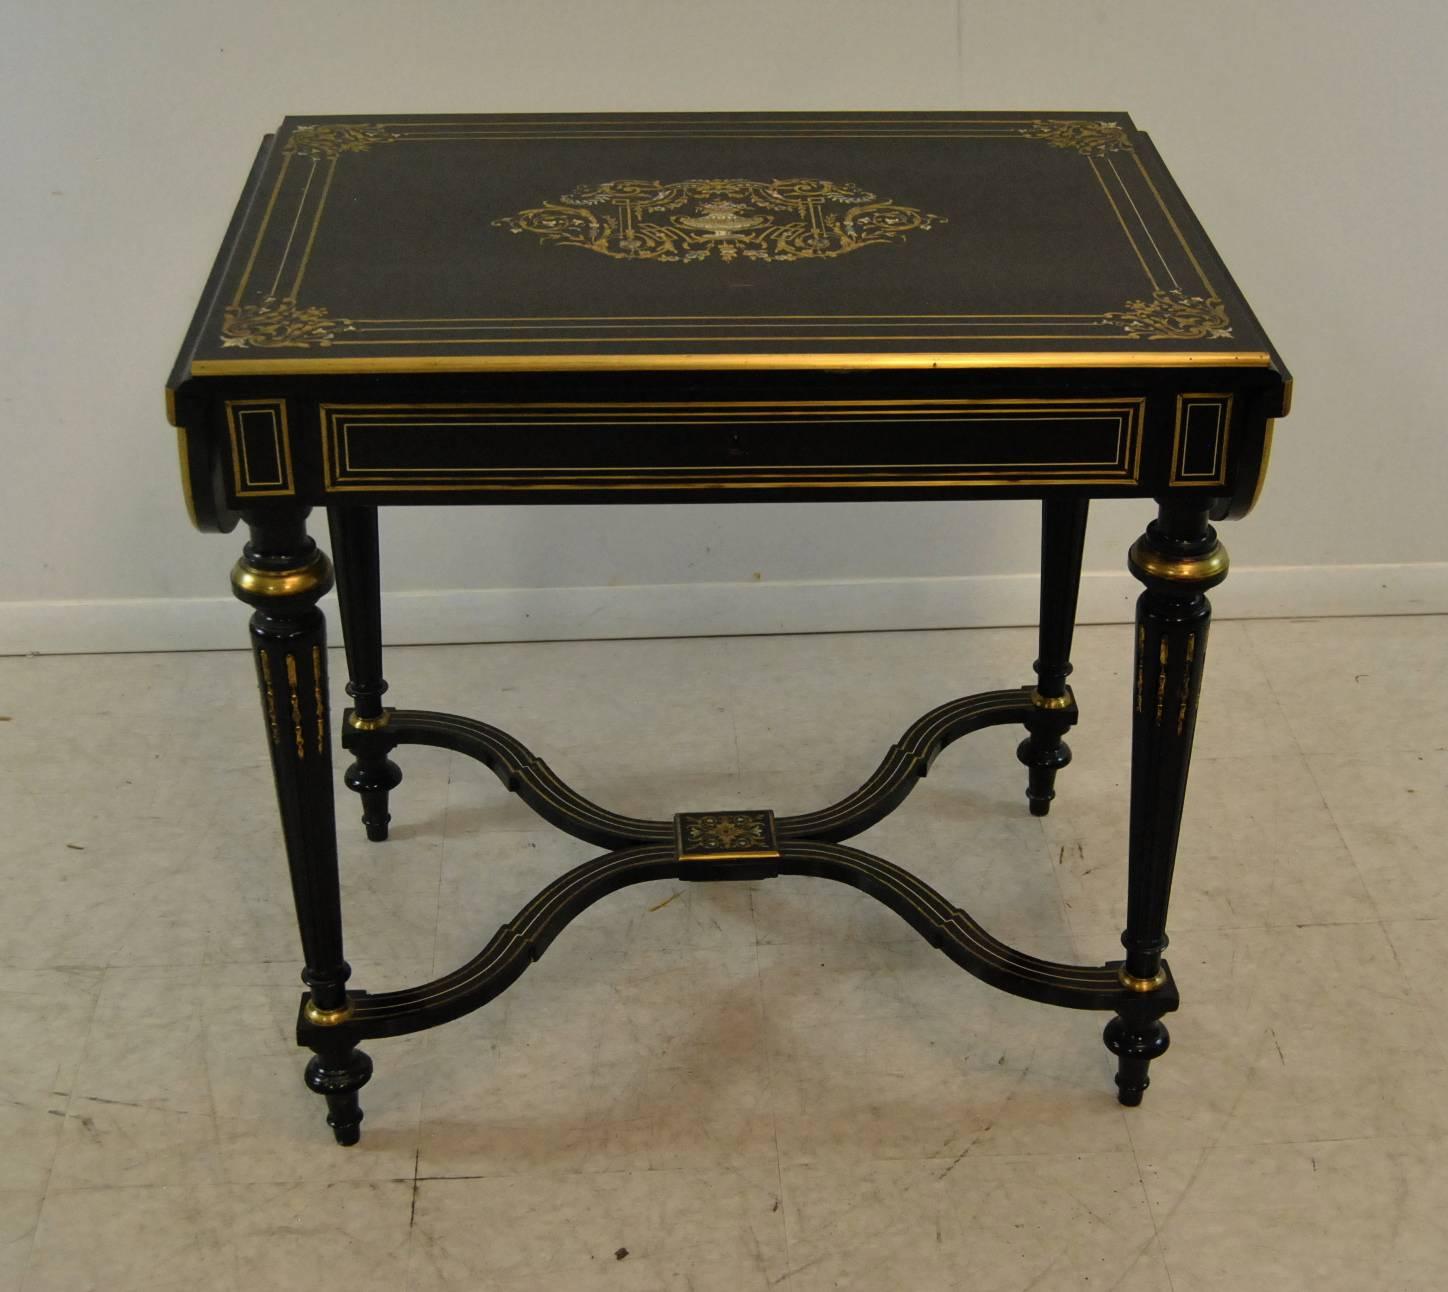 This 19th century drop leaf table features ebonized finish with inlaid flower basket design in brass and mother-of-pearl. Measure: Shaped leafs increase width to 44.5